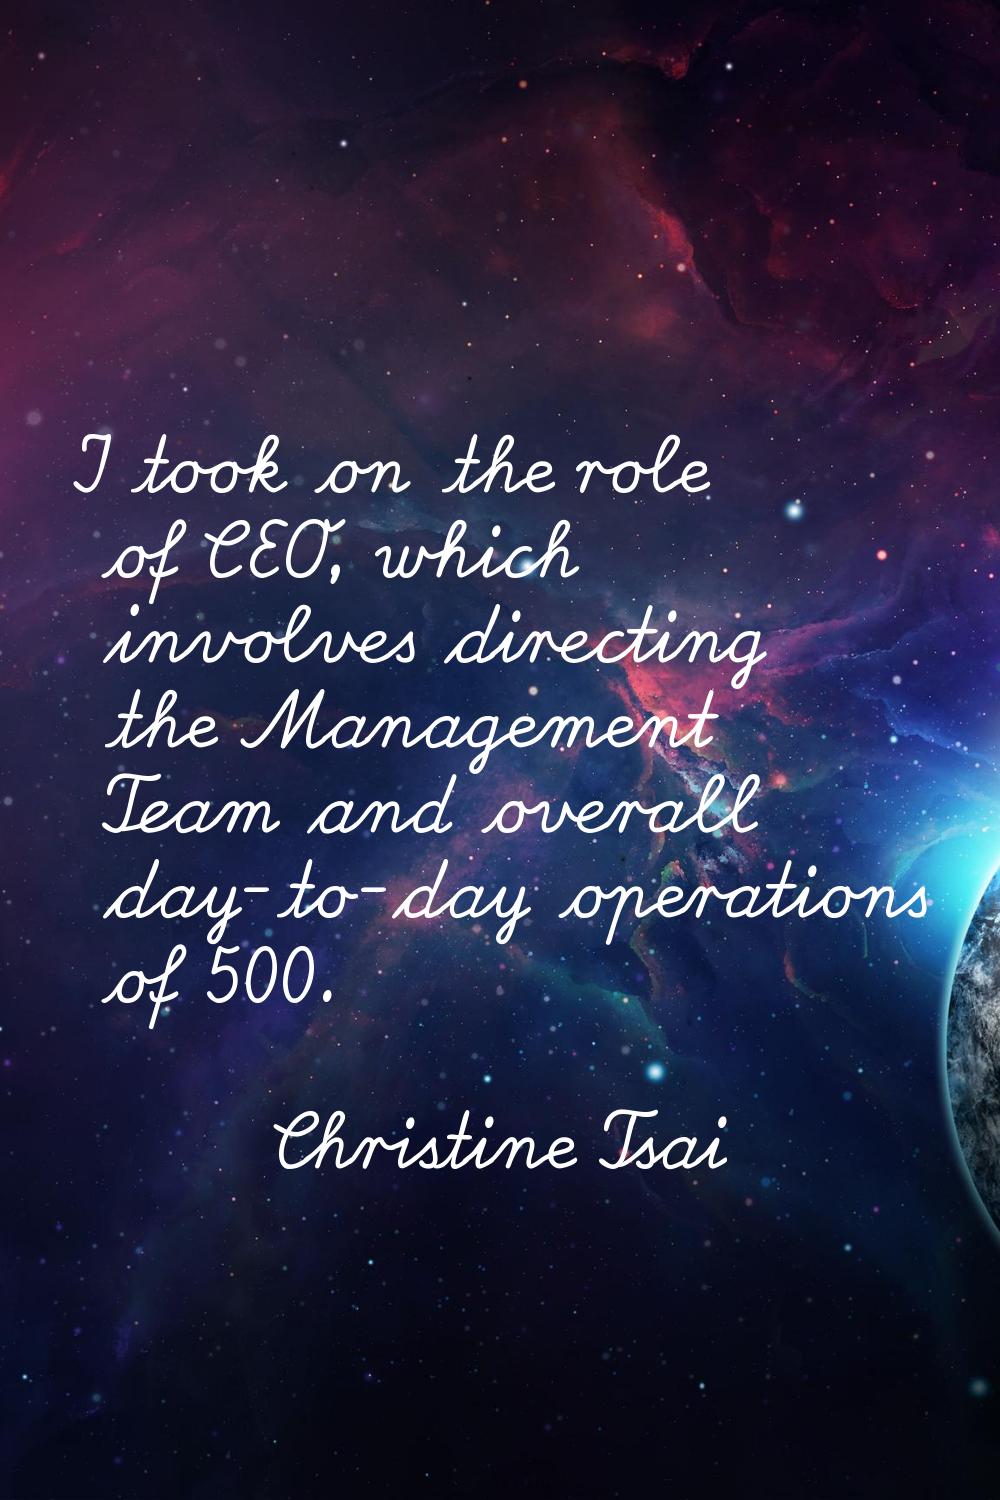 I took on the role of CEO, which involves directing the Management Team and overall day-to-day oper